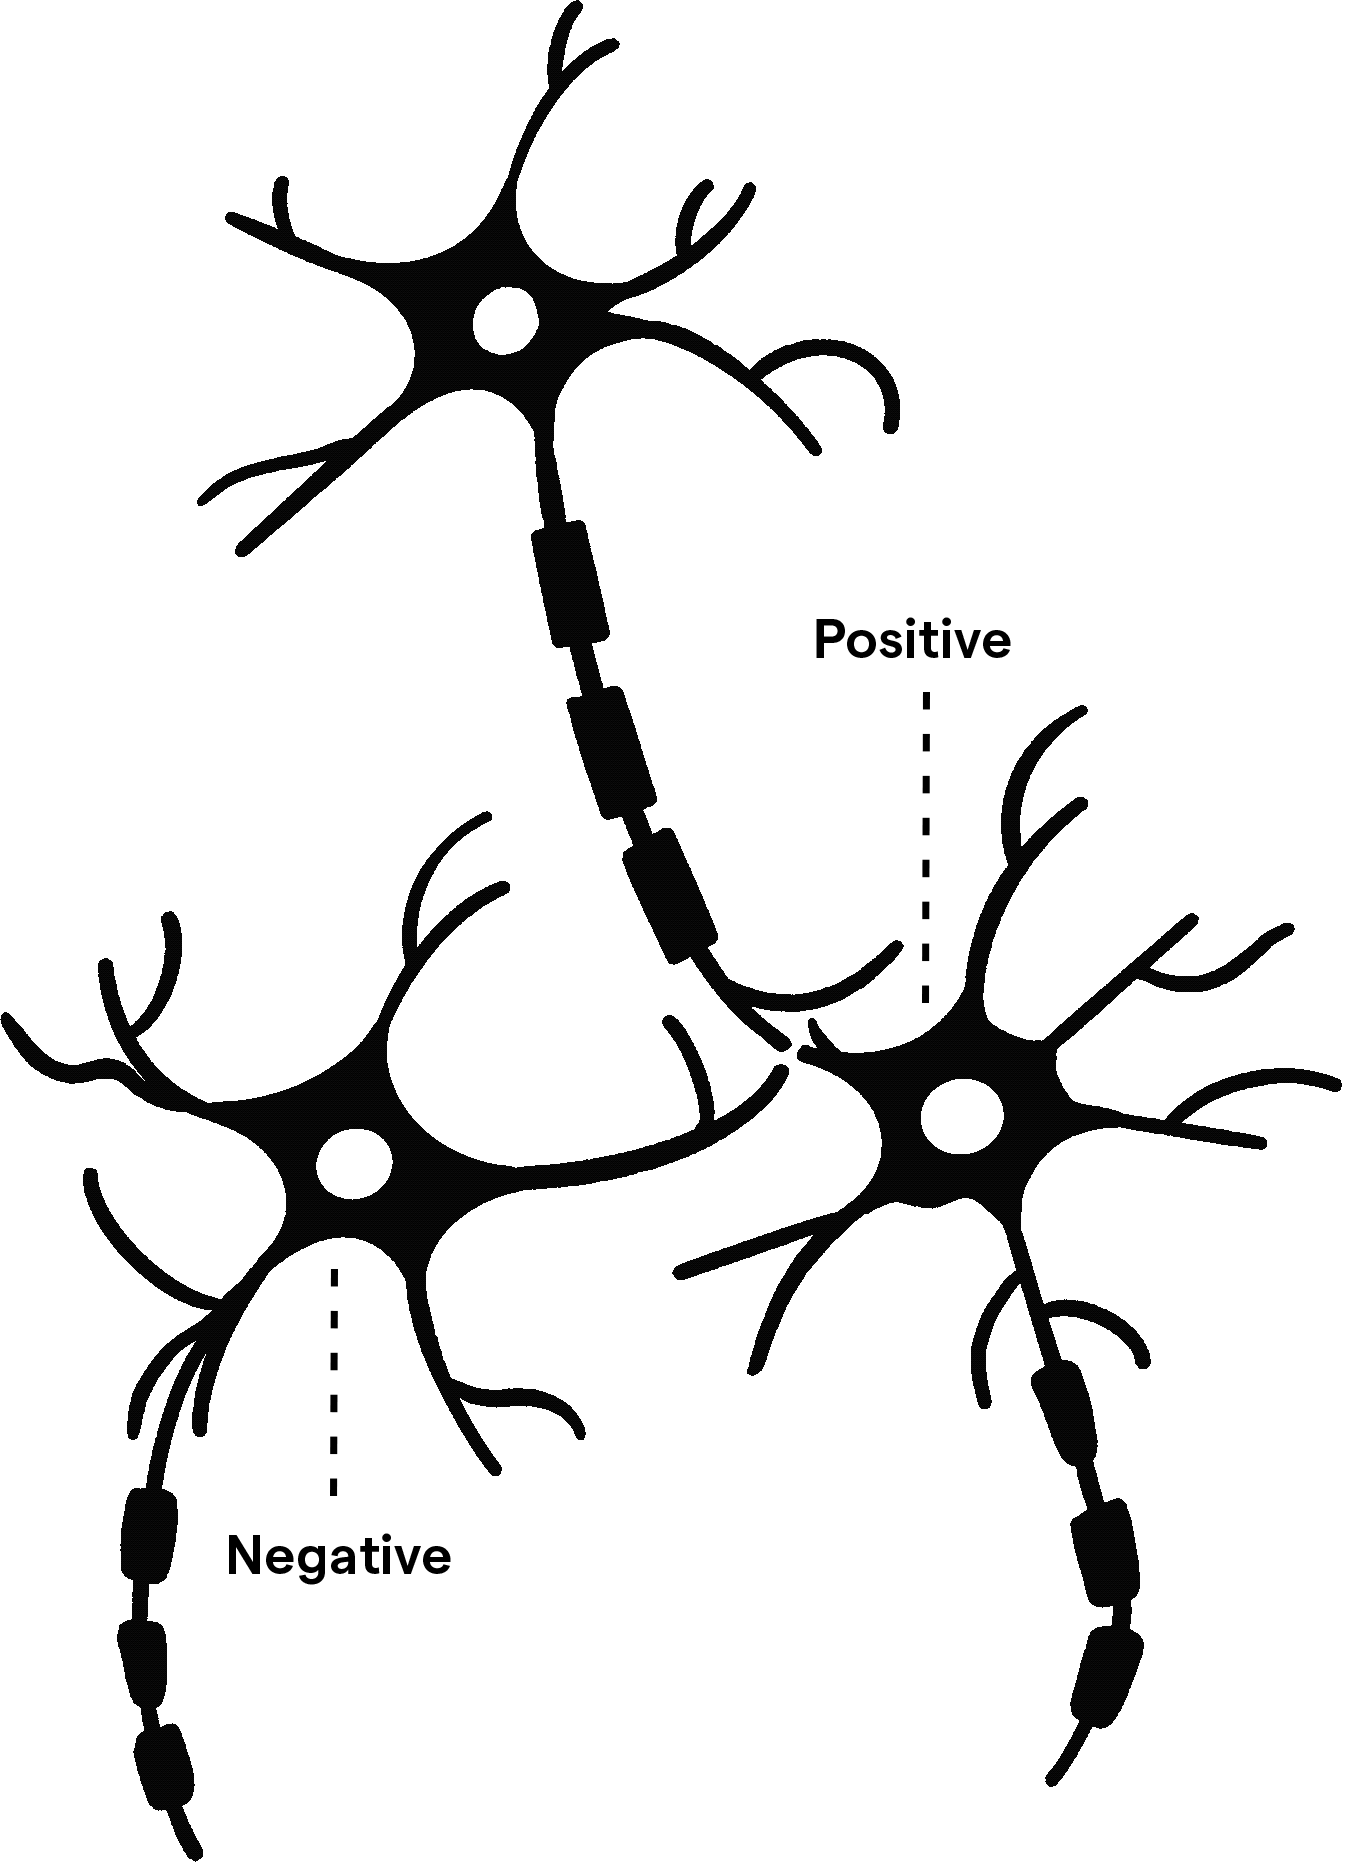 Positive neural pathways in the brain